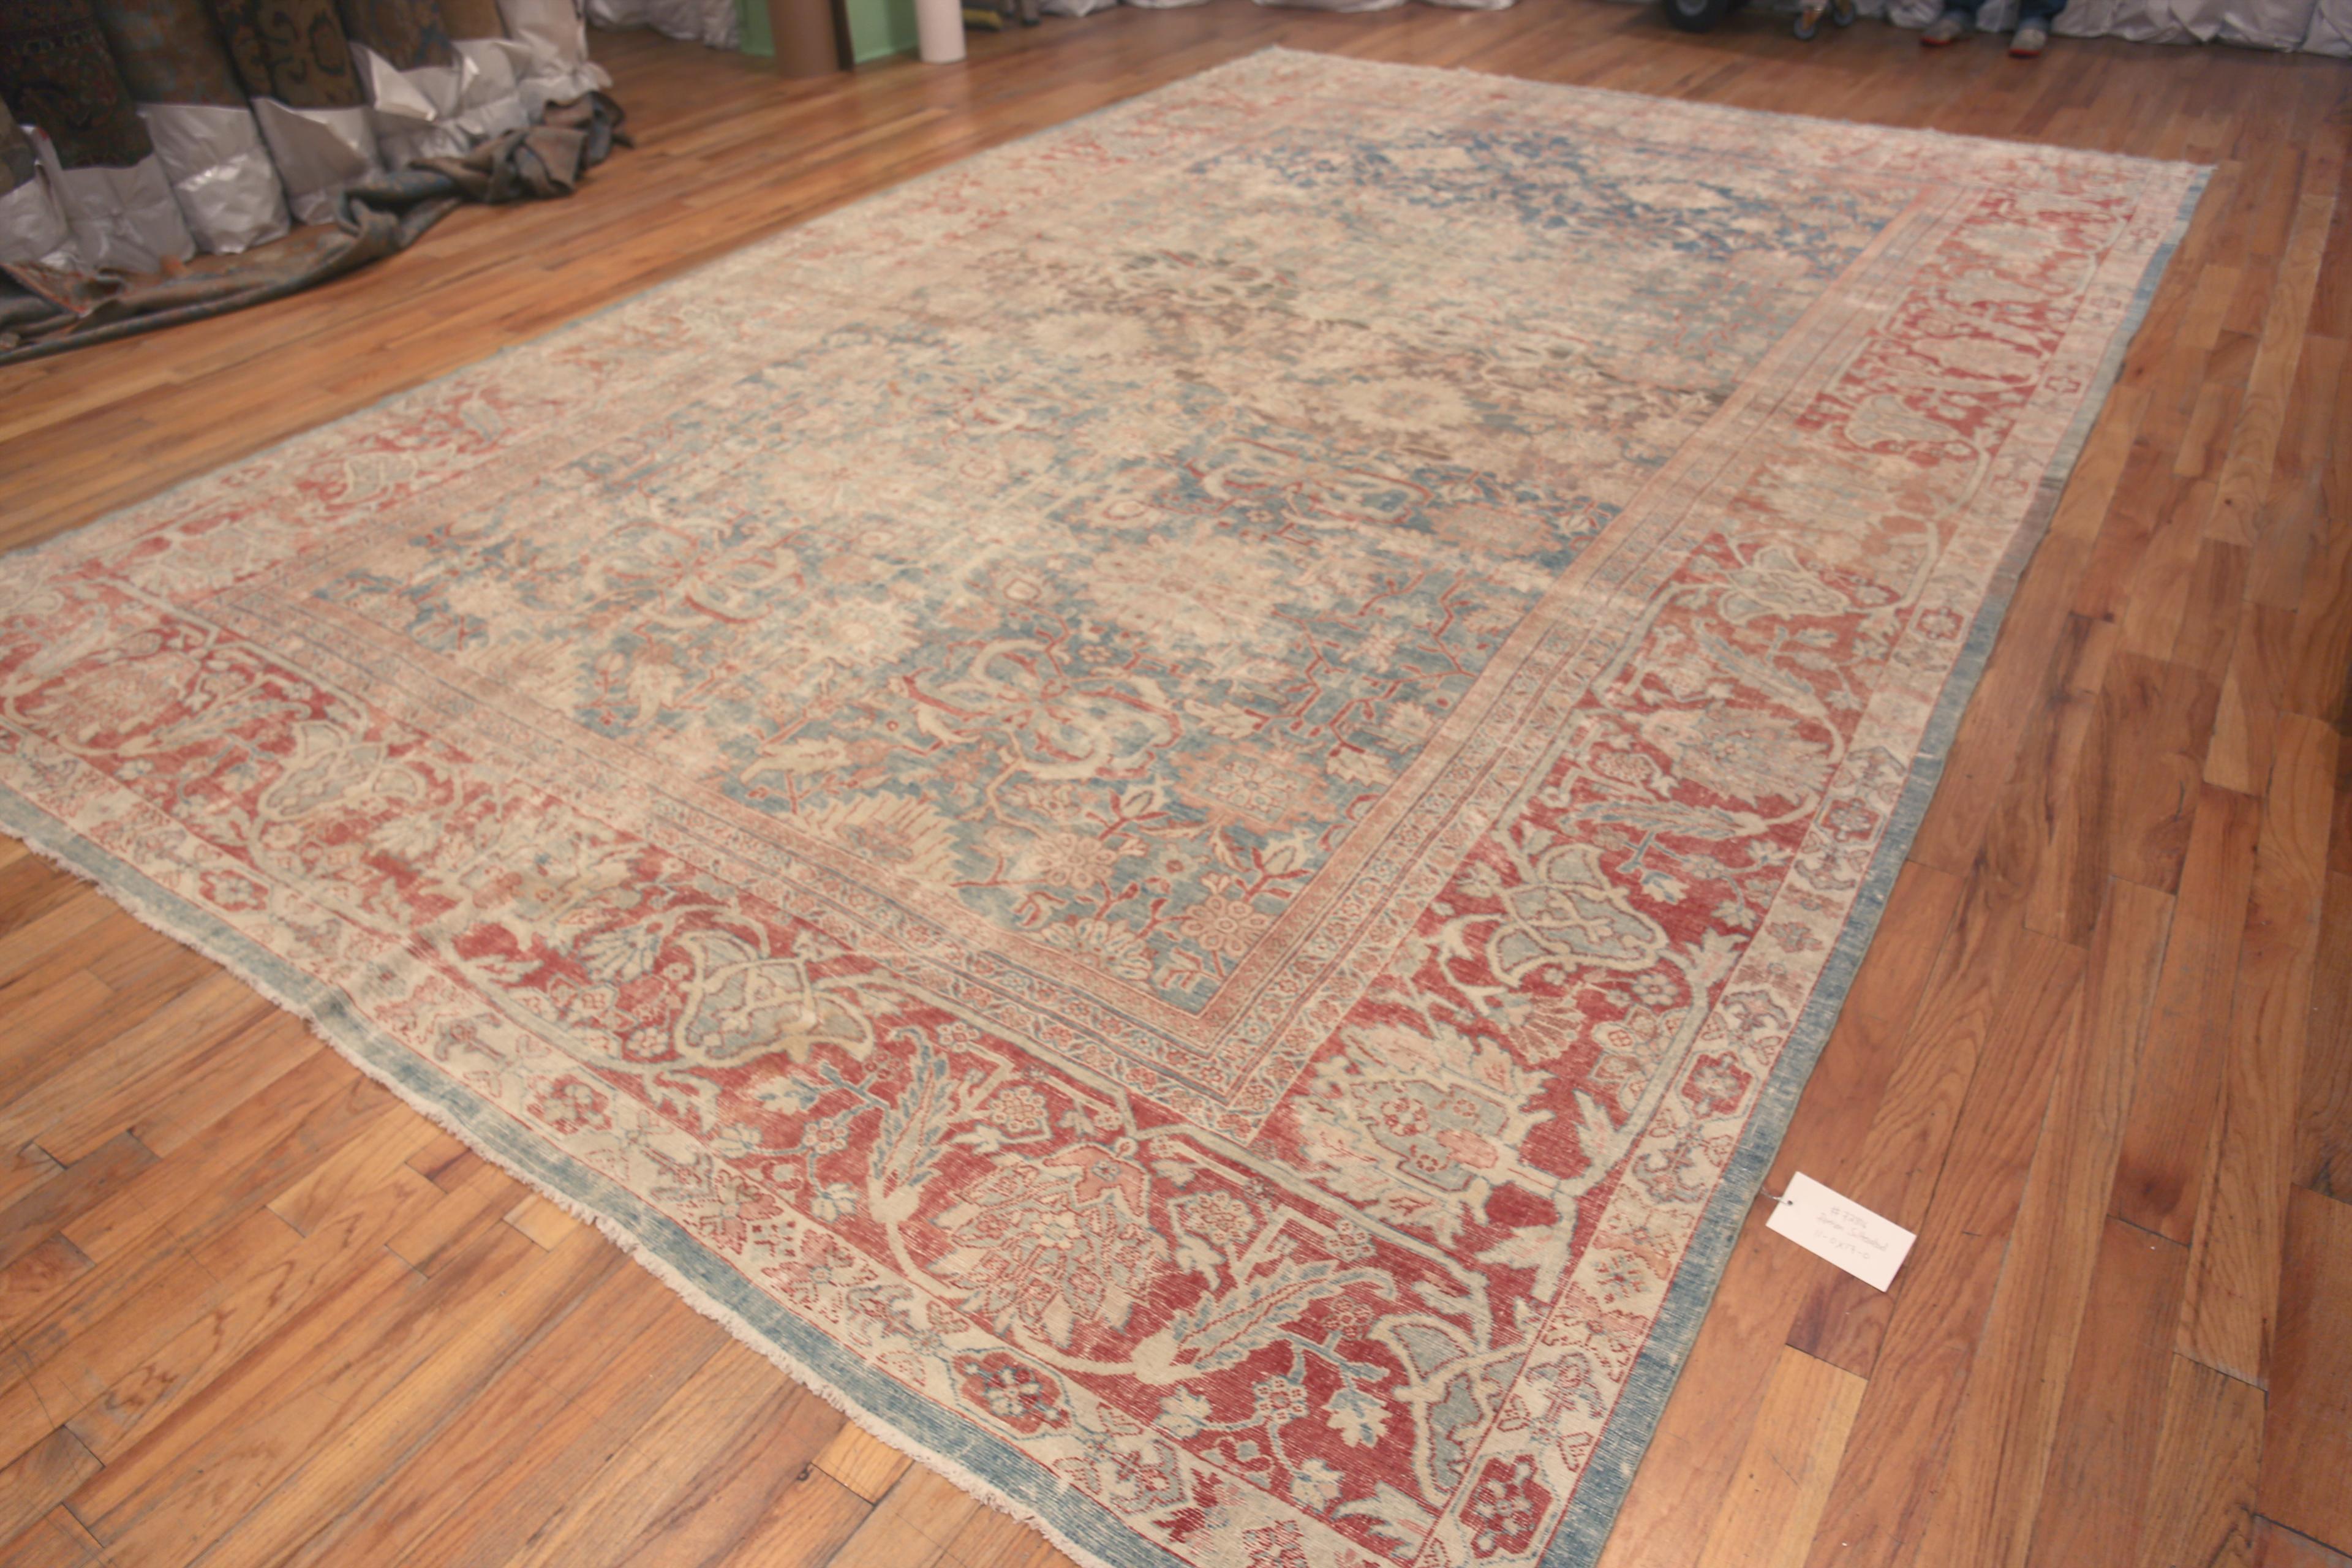 Large Decorative Antique Persian Shabby Chic Sultanabad Rug 11' x 17' For Sale 3